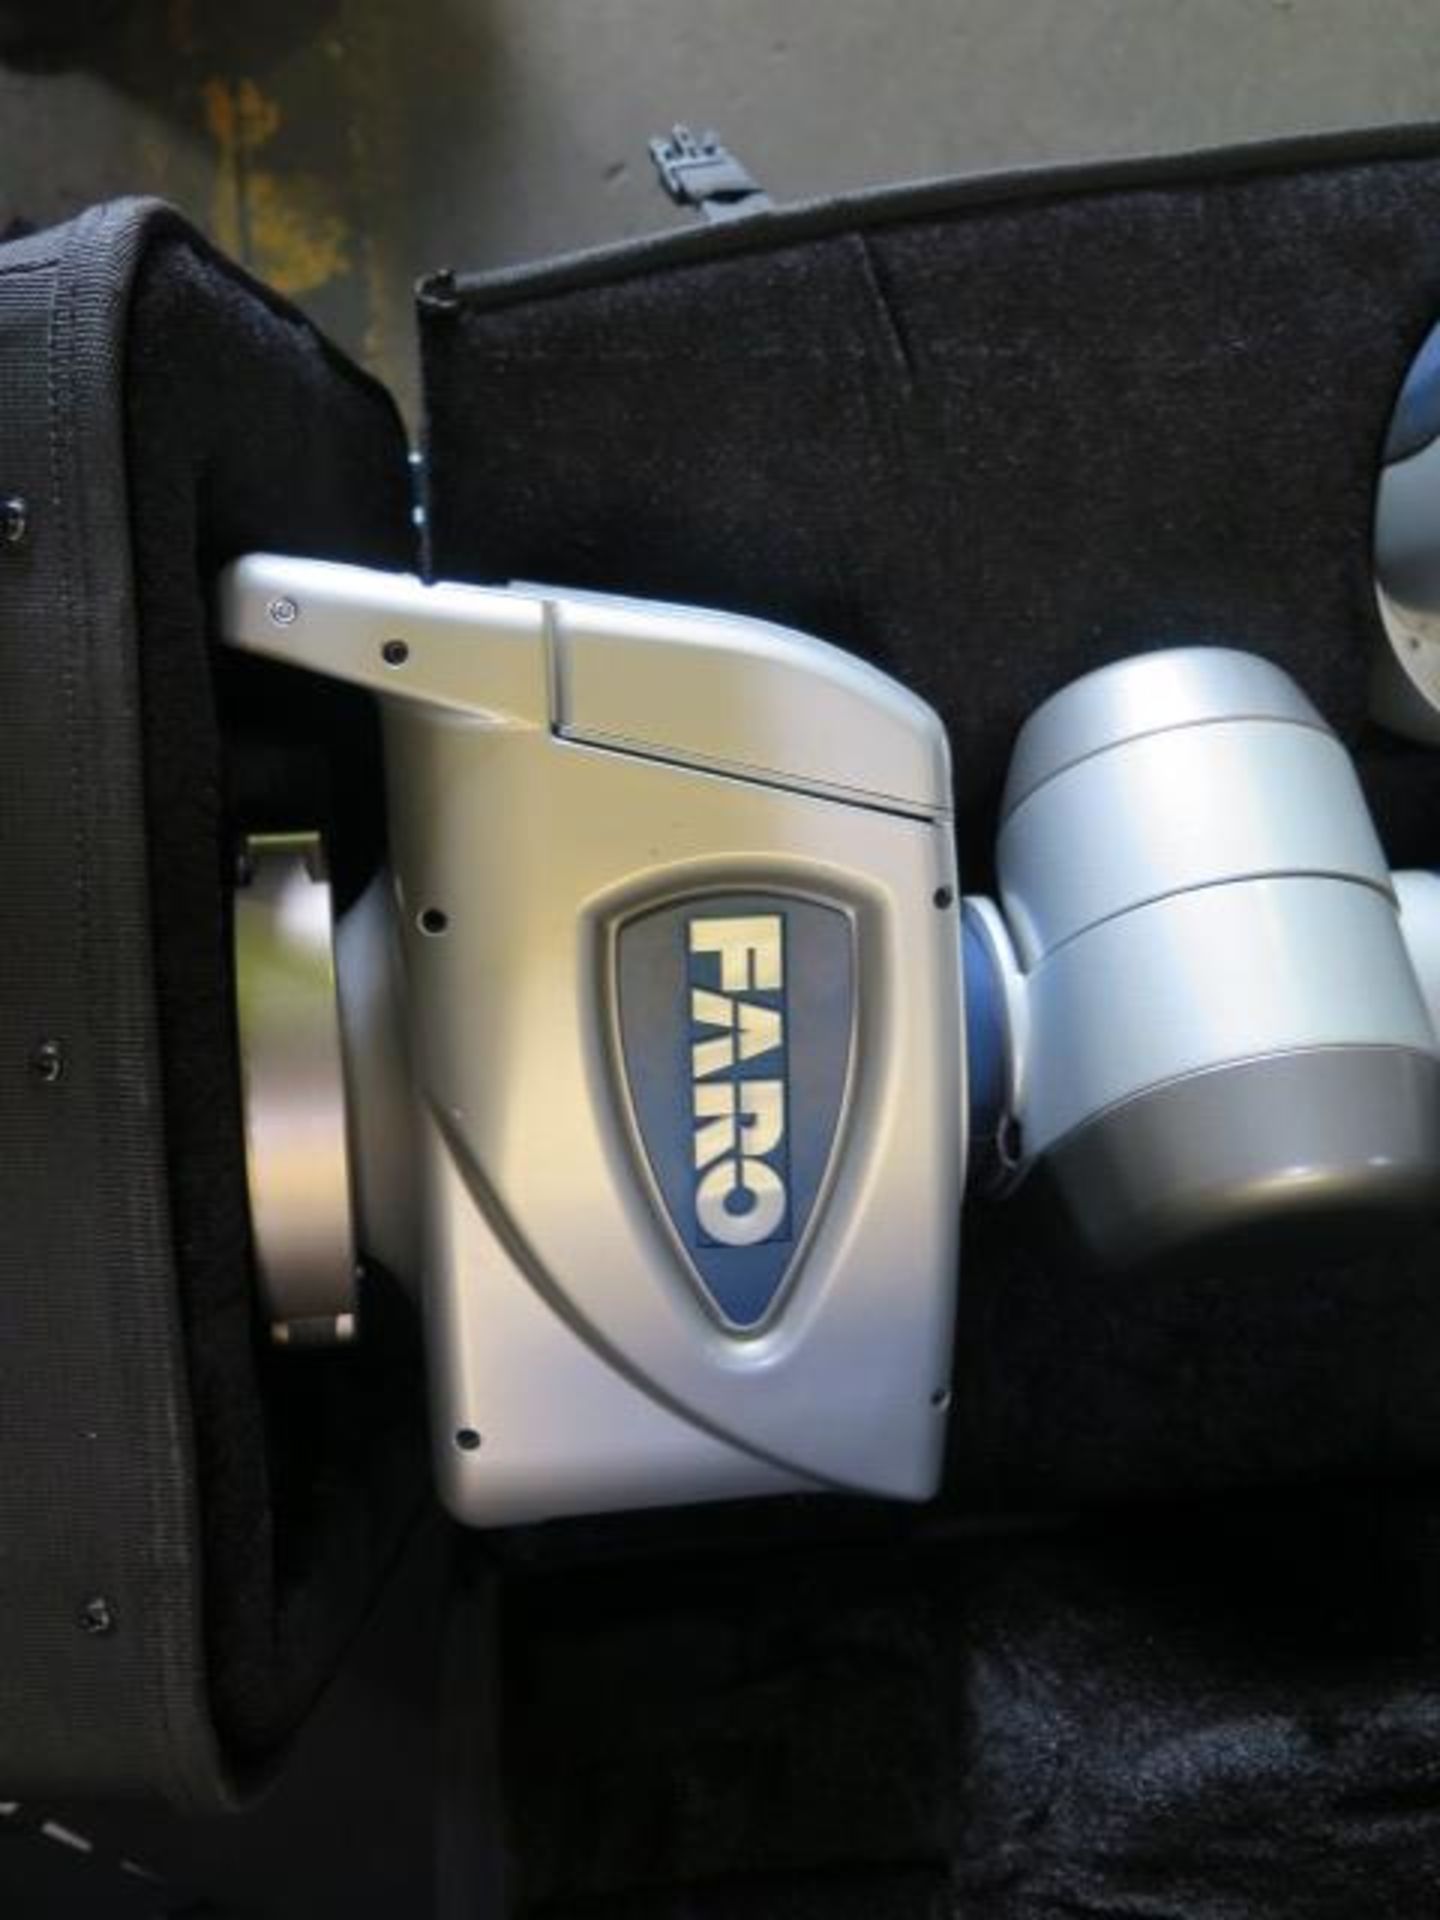 2011 Faro "EDGE" CMM Arm s/n E09-05-11-09320 w/ Hand Attachment, Tip Accessories, Computer and Trave - Image 3 of 18